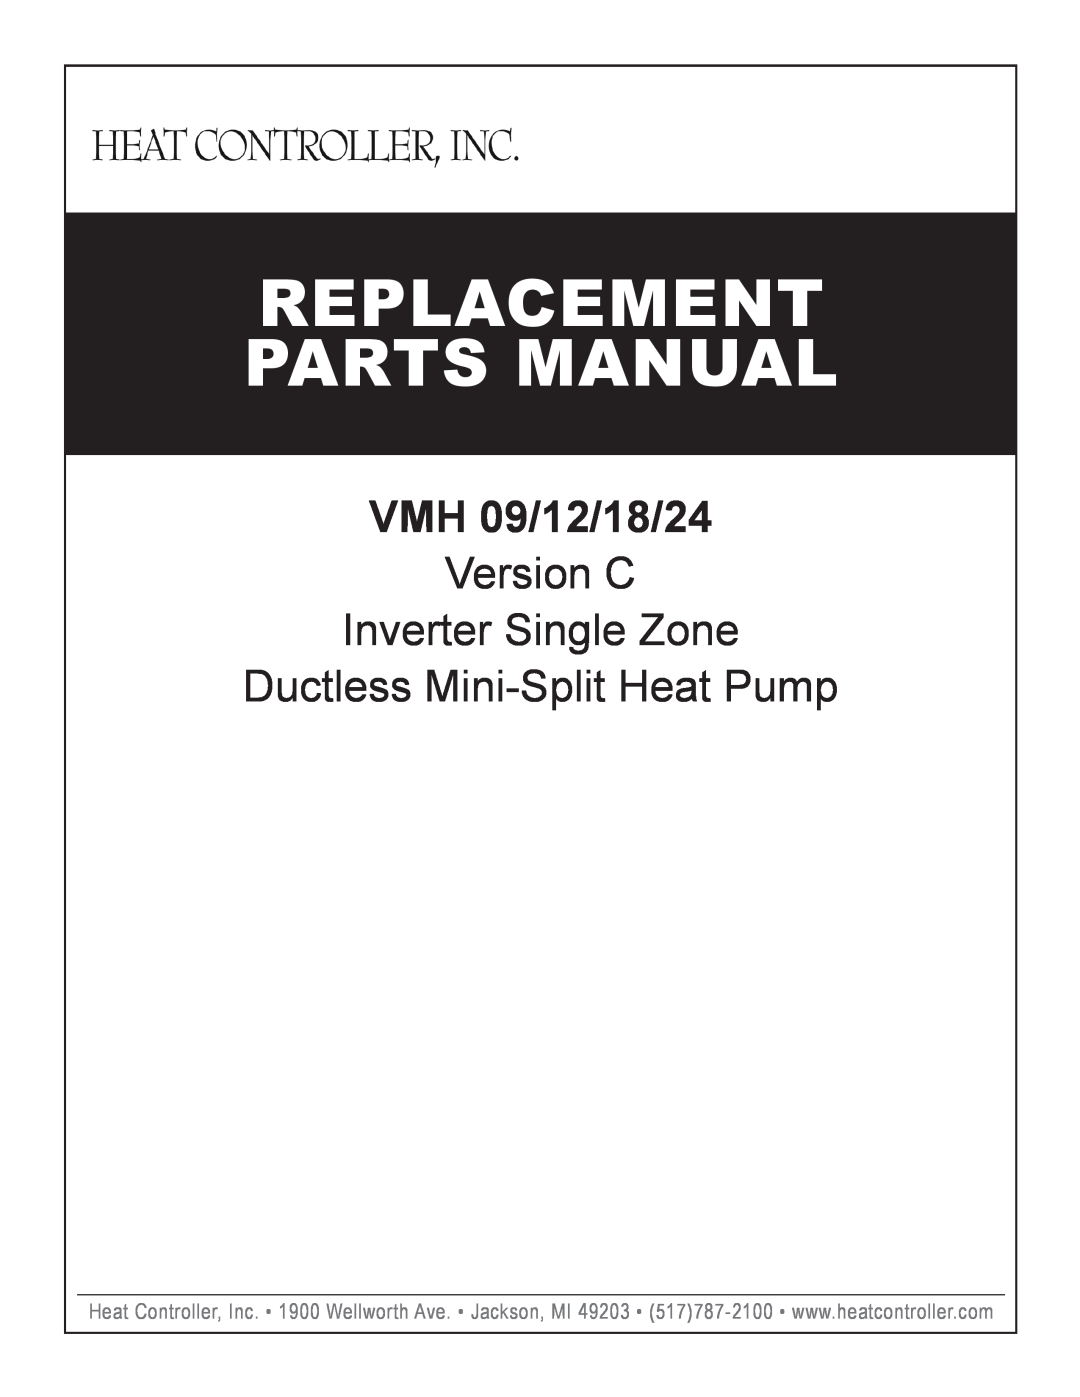 Heat Controller VMH 24 manual Replacement Parts Manual, VMH 09/12/18/24, Version C Inverter Single Zone 